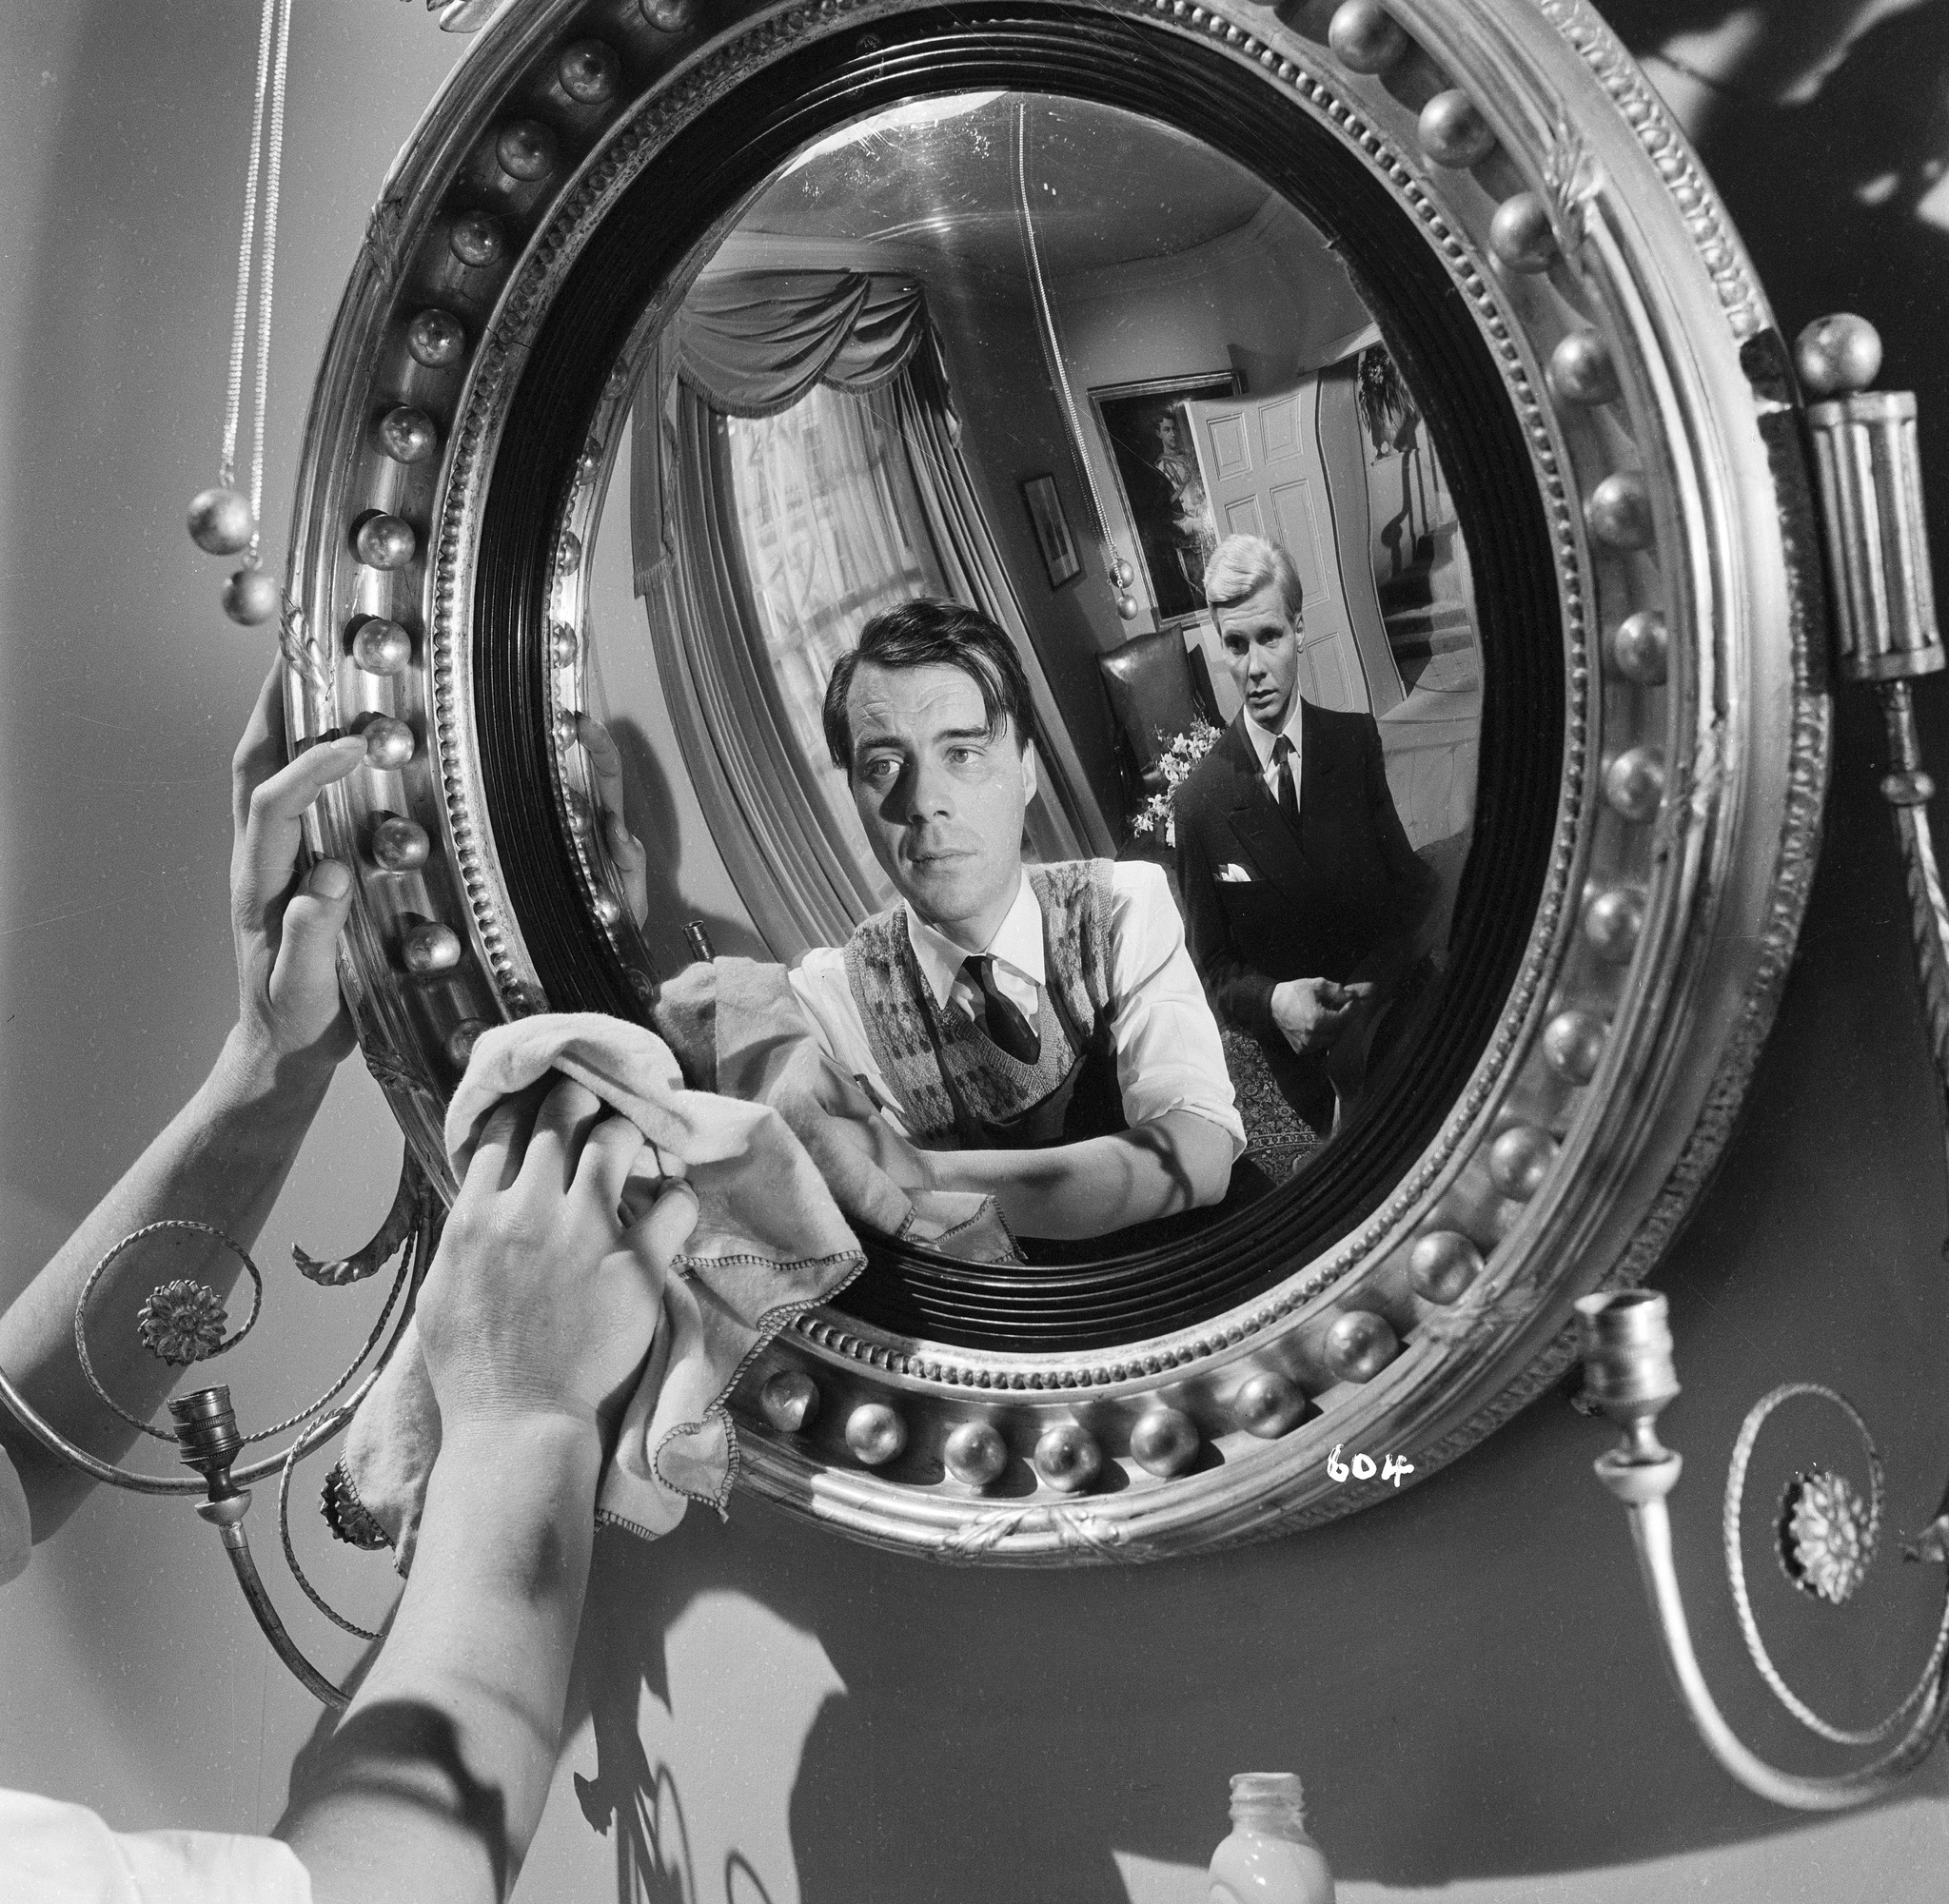 Still of Dirk Bogarde and James Fox in The Servant (1963)